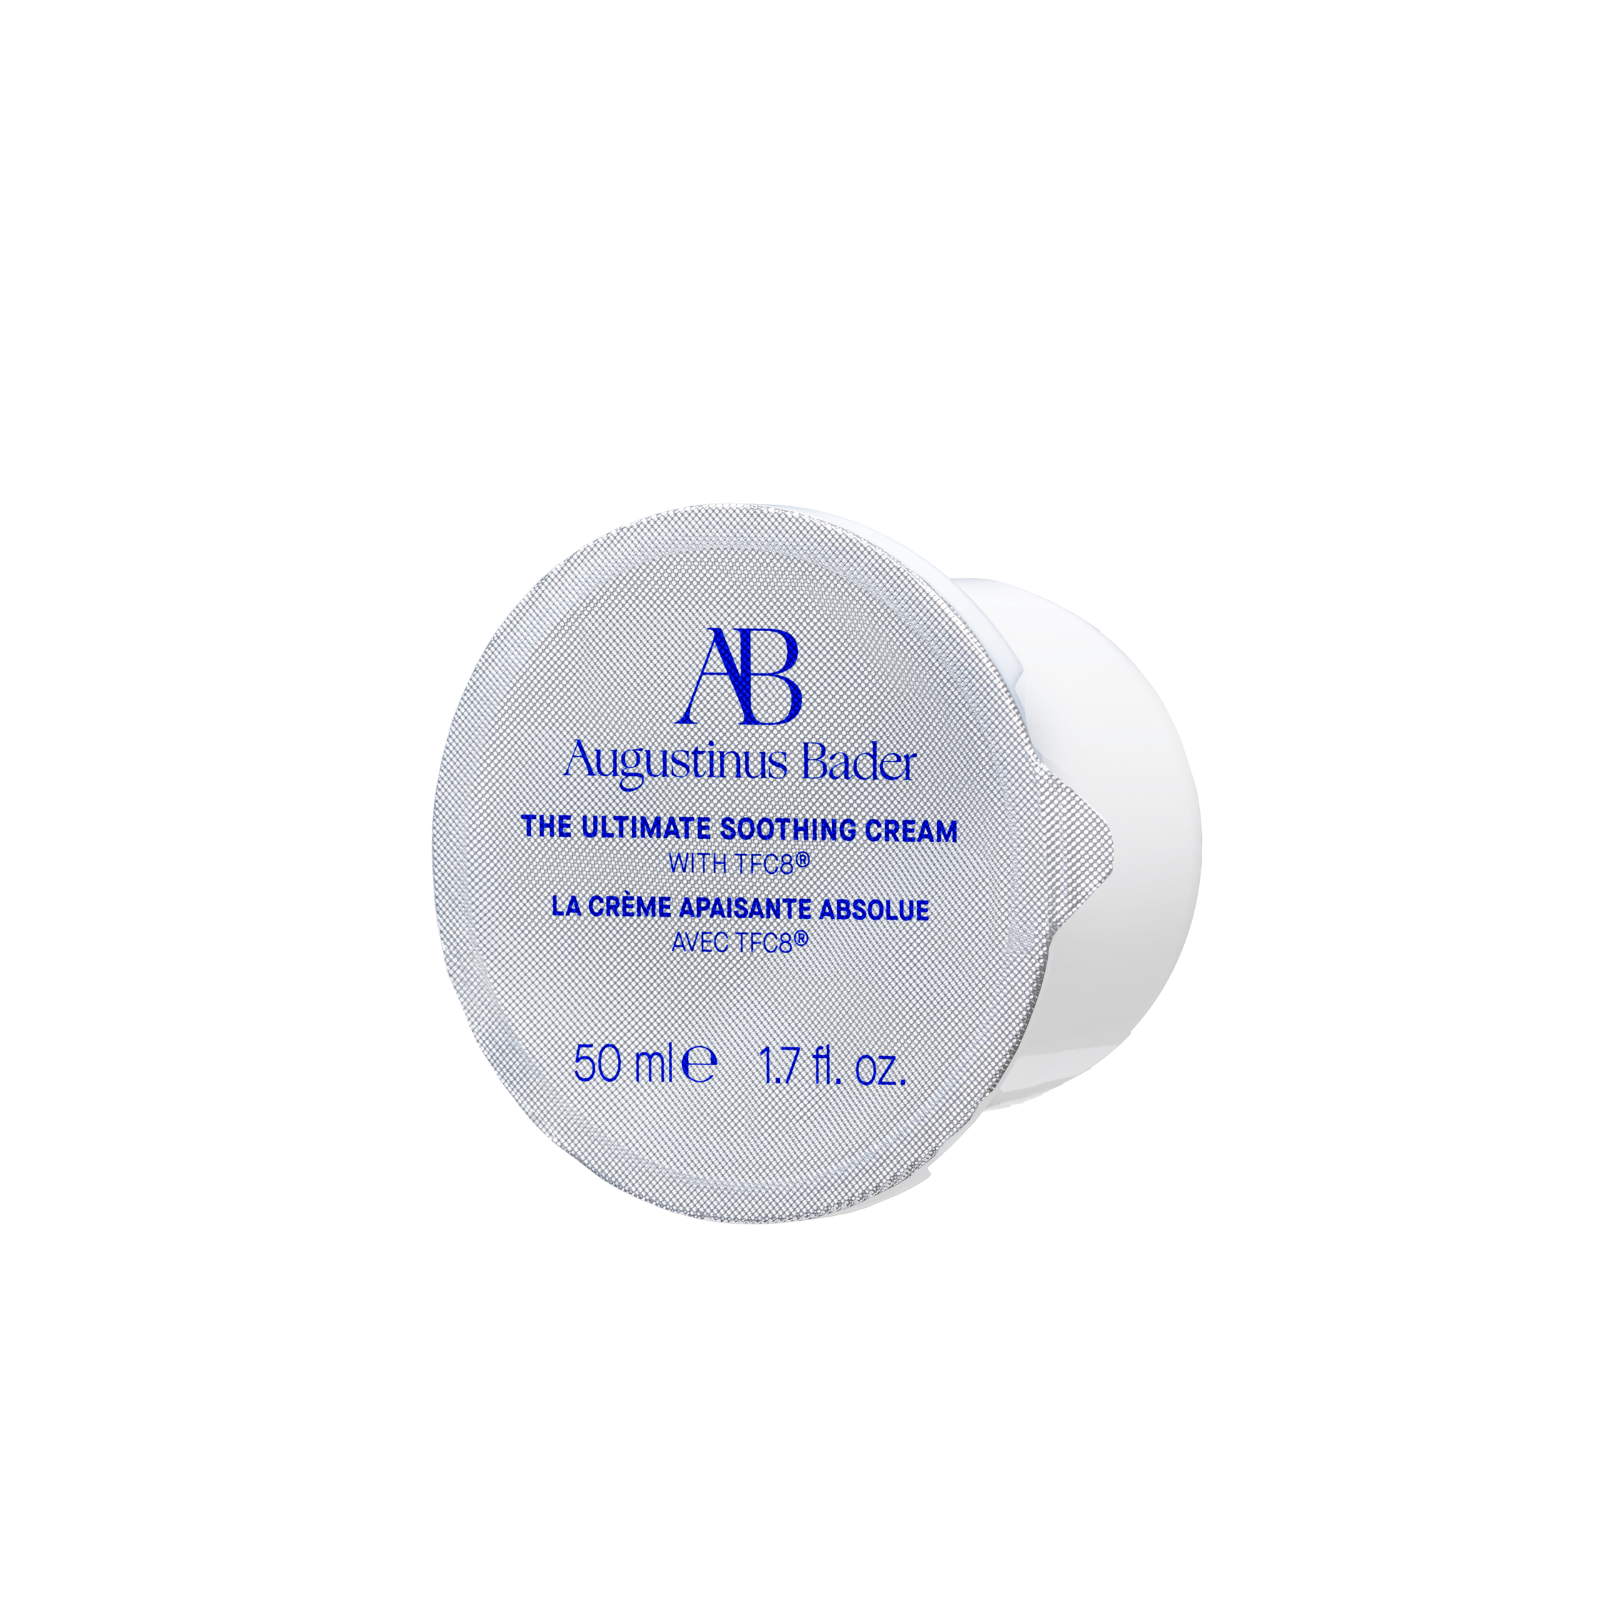 Augustinus Bader The Ultimate Soothing Cream refill